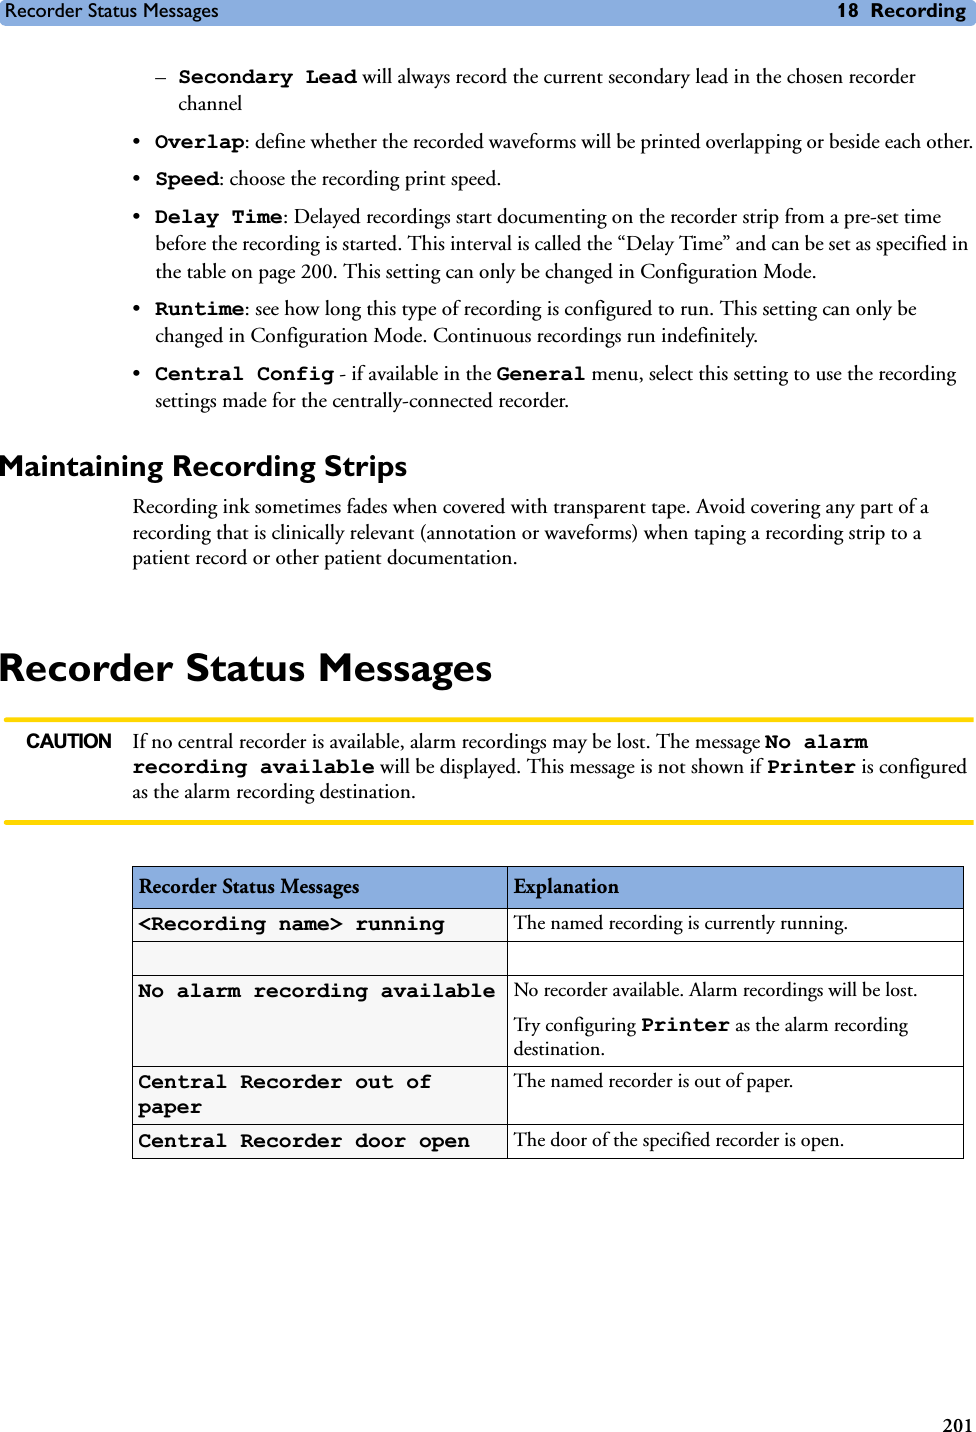 Recorder Status Messages 18 Recording201–Secondary Lead will always record the current secondary lead in the chosen recorder channel•Overlap: define whether the recorded waveforms will be printed overlapping or beside each other.•Speed: choose the recording print speed.•Delay Time: Delayed recordings start documenting on the recorder strip from a pre-set time before the recording is started. This interval is called the “Delay Time” and can be set as specified in the table on page 200. This setting can only be changed in Configuration Mode.•Runtime: see how long this type of recording is configured to run. This setting can only be changed in Configuration Mode. Continuous recordings run indefinitely.•Central Config - if available in the General menu, select this setting to use the recording settings made for the centrally-connected recorder.Maintaining Recording StripsRecording ink sometimes fades when covered with transparent tape. Avoid covering any part of a recording that is clinically relevant (annotation or waveforms) when taping a recording strip to a patient record or other patient documentation. Recorder Status MessagesCAUTION If no central recorder is available, alarm recordings may be lost. The message No alarm recording available will be displayed. This message is not shown if Printer is configured as the alarm recording destination.Recorder Status Messages Explanation&lt;Recording name&gt; running The named recording is currently running. No alarm recording available No recorder available. Alarm recordings will be lost. Try configuring Printer as the alarm recording destination.Central Recorder out of paperThe named recorder is out of paper.Central Recorder door open The door of the specified recorder is open.